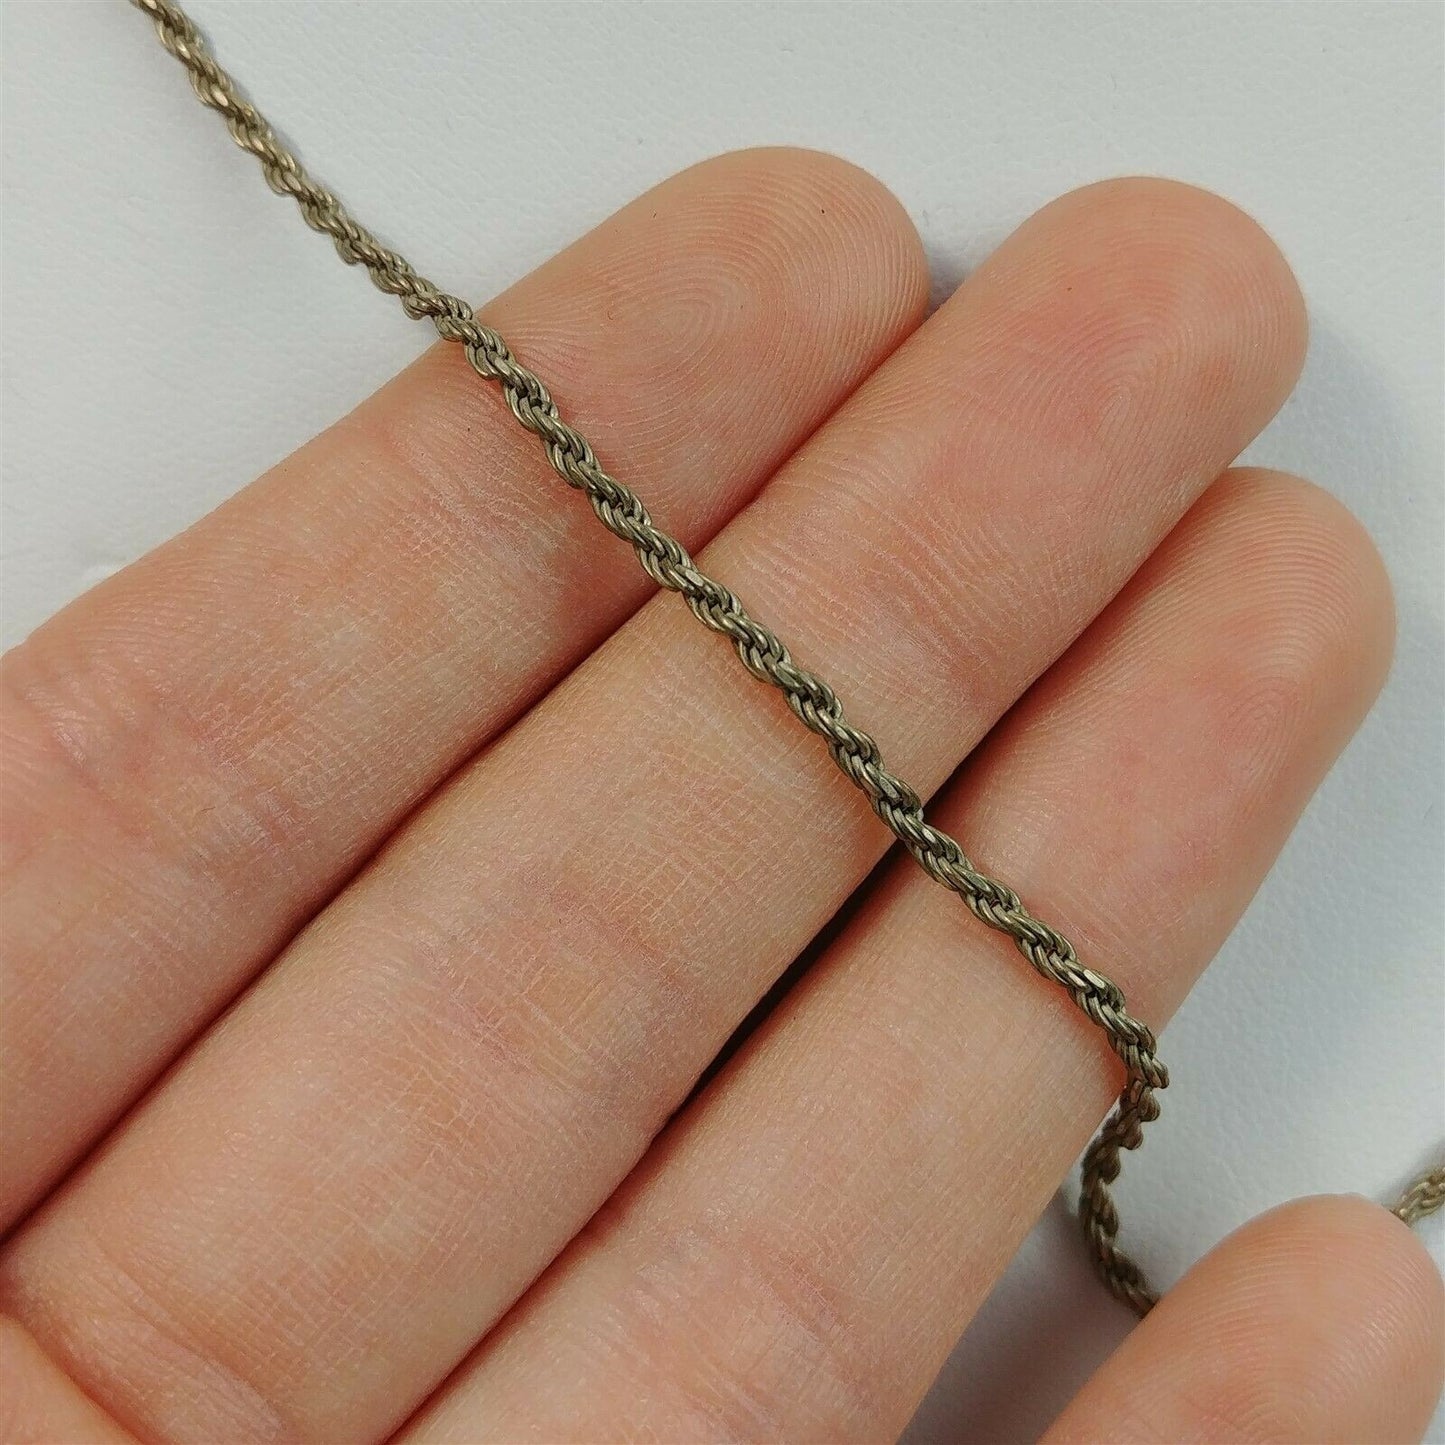 Italy 925 Sterling Silver Rope Chain Necklace 17" - 5.6g